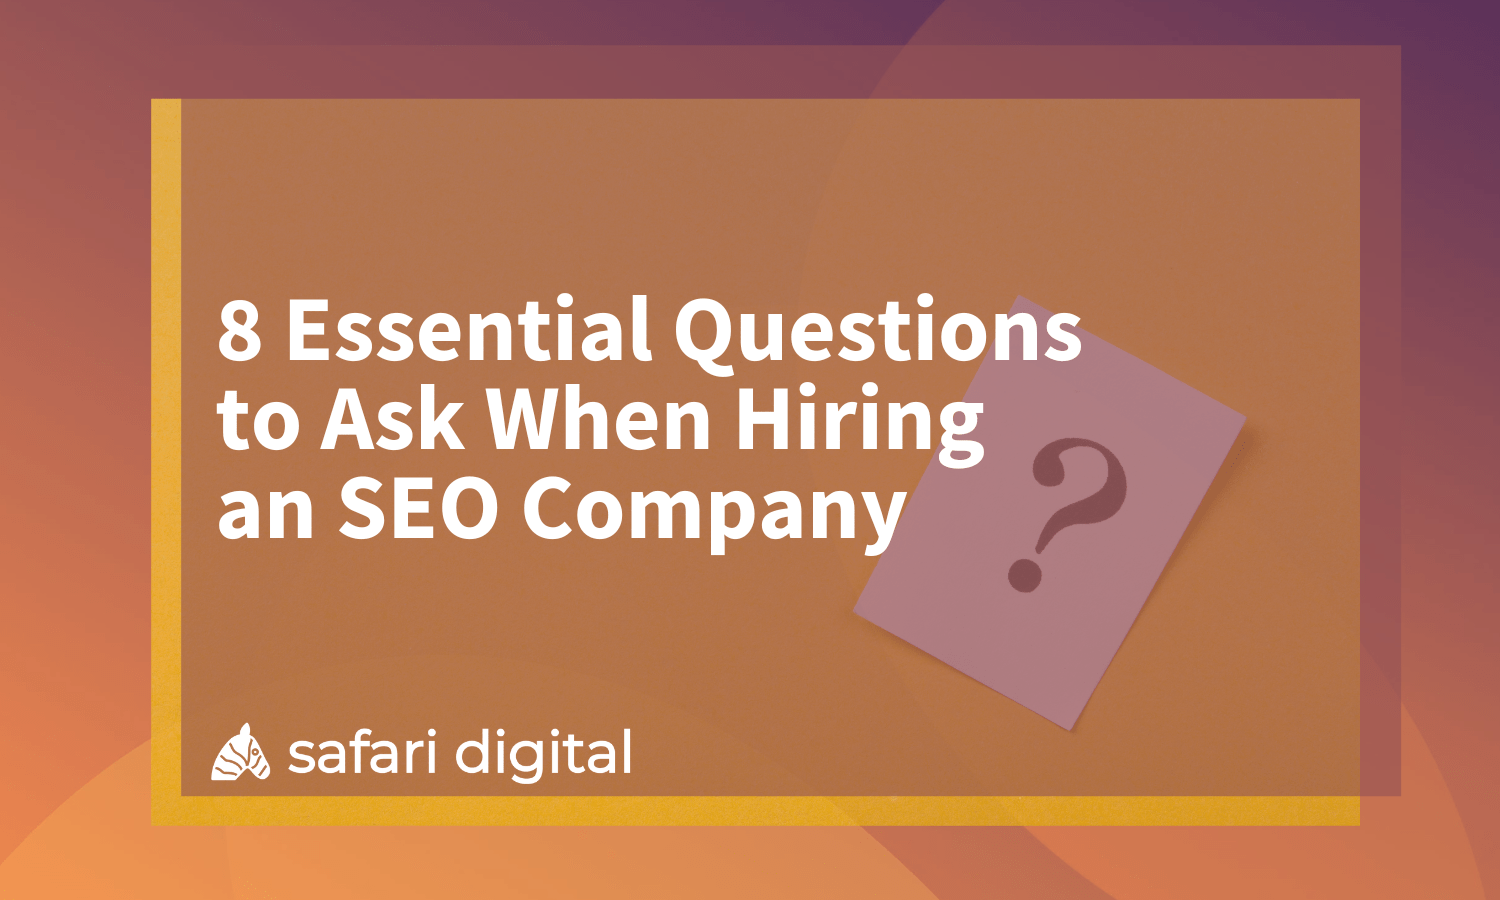 8 Essential Questions to Ask When Hiring an SEO Company